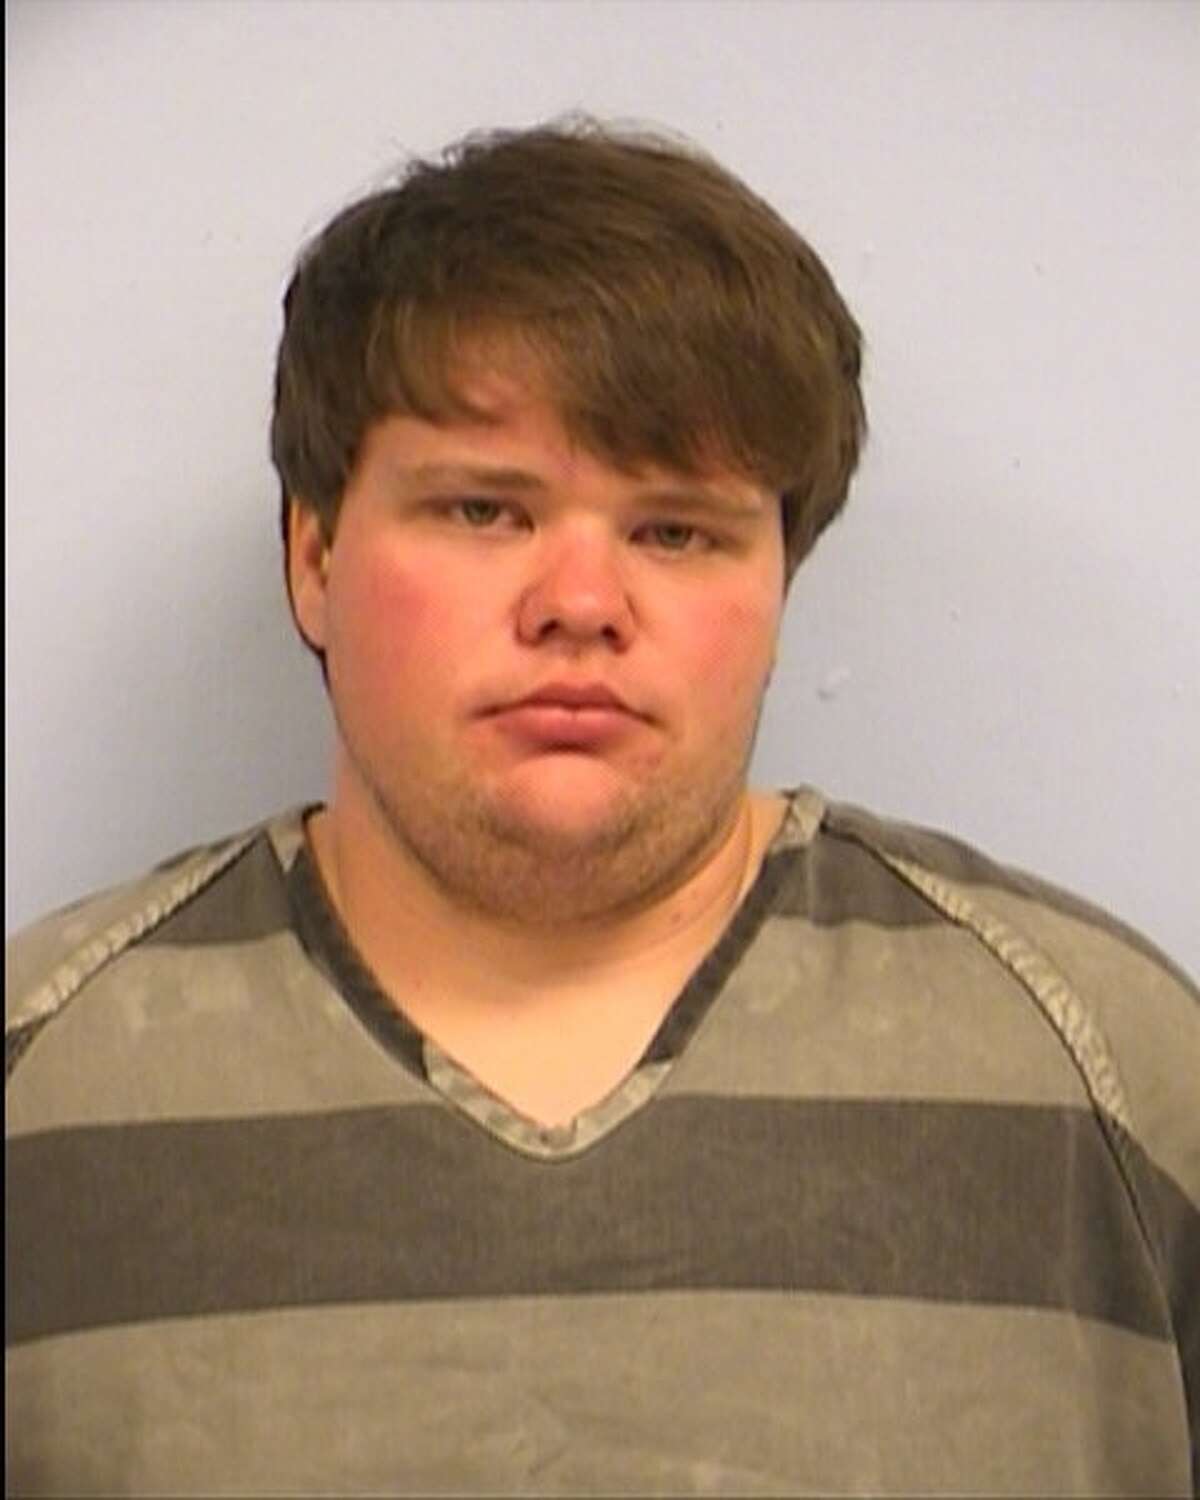 Austin police arrested Tucker Sauer, 21, and charged him with deadly conduct, a third-degree felony, on Feb. 20, 2016, for allegedly throwing bottles at a pedestrian from a fourth-story balcony in the West Campus neighborhood near the University of Texas at Austin campus.